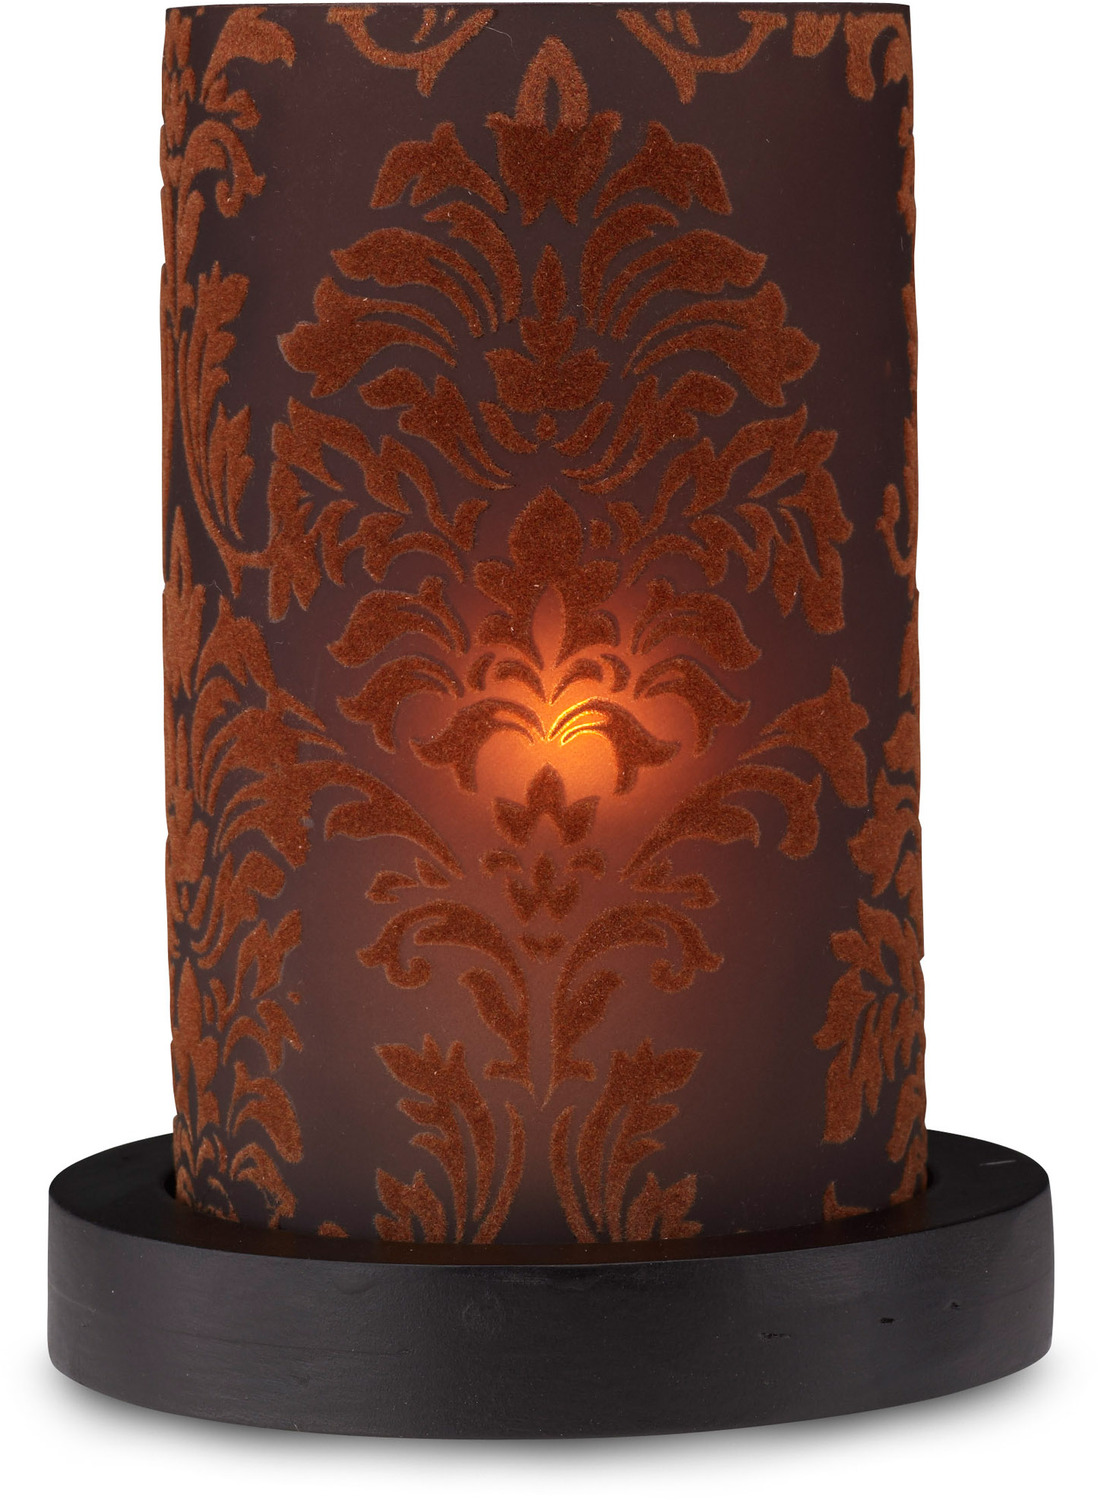 Chocolate Candle Holder by Simply Stated - Chocolate Candle Holder - 6.5" Cylinder with Base